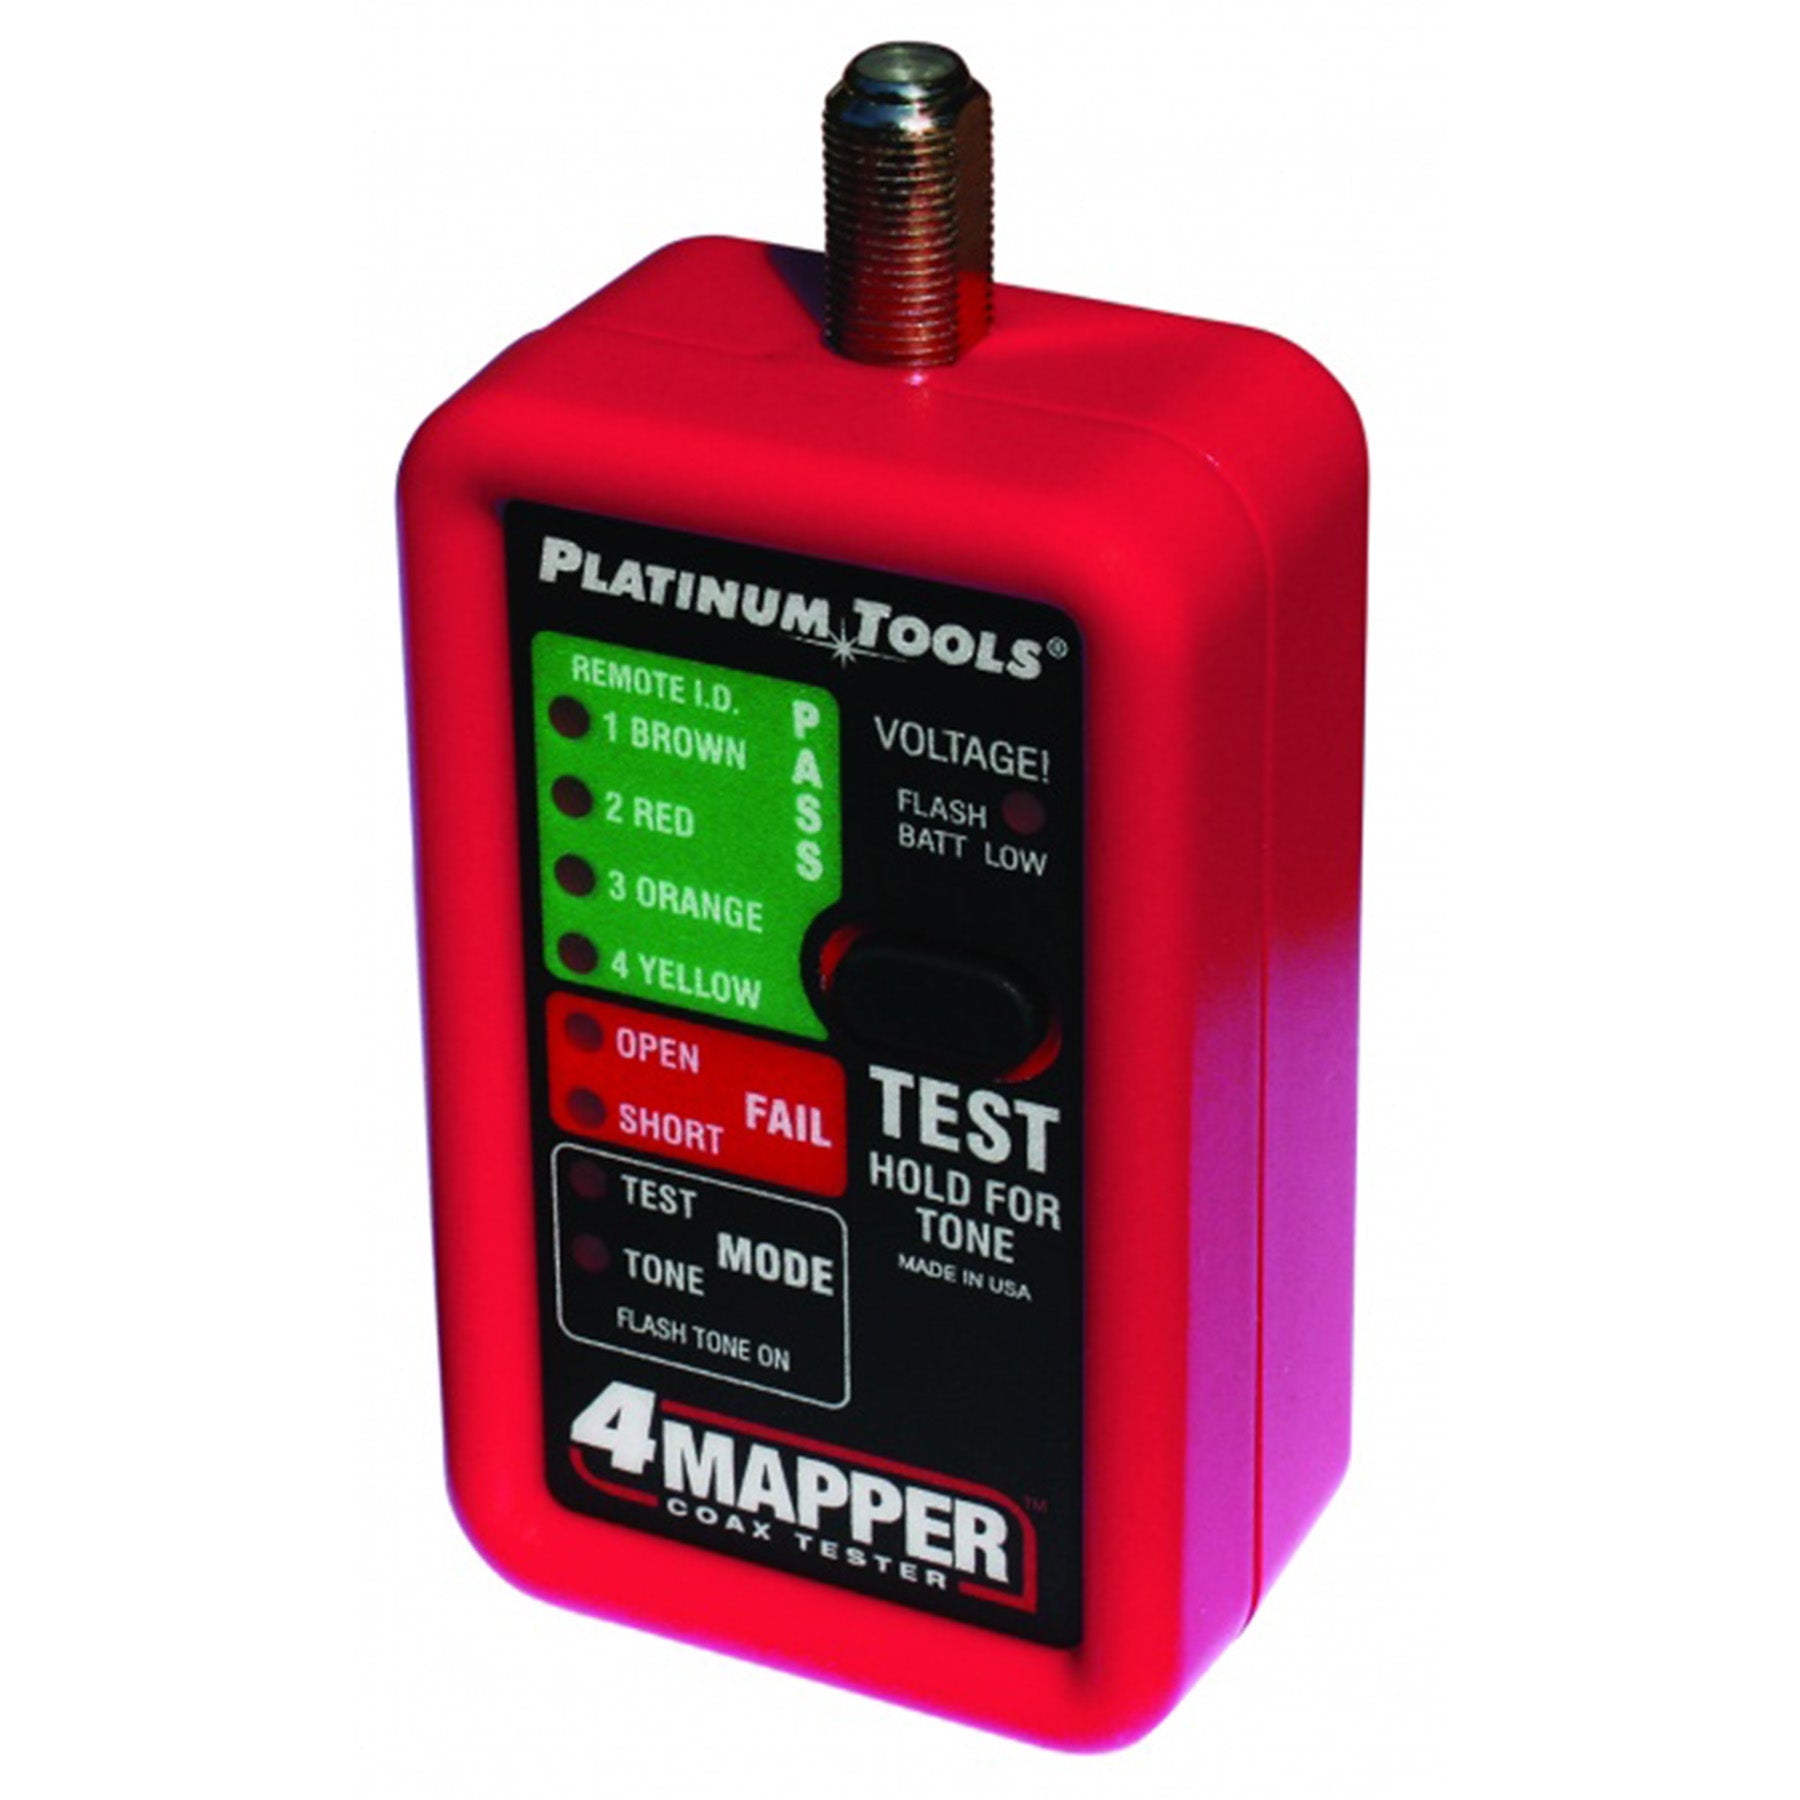 4mapper™ Coax Tester with 4 custom F remotes, remote holster & 1 F (F to F) adapter Platinum Tools: T104C